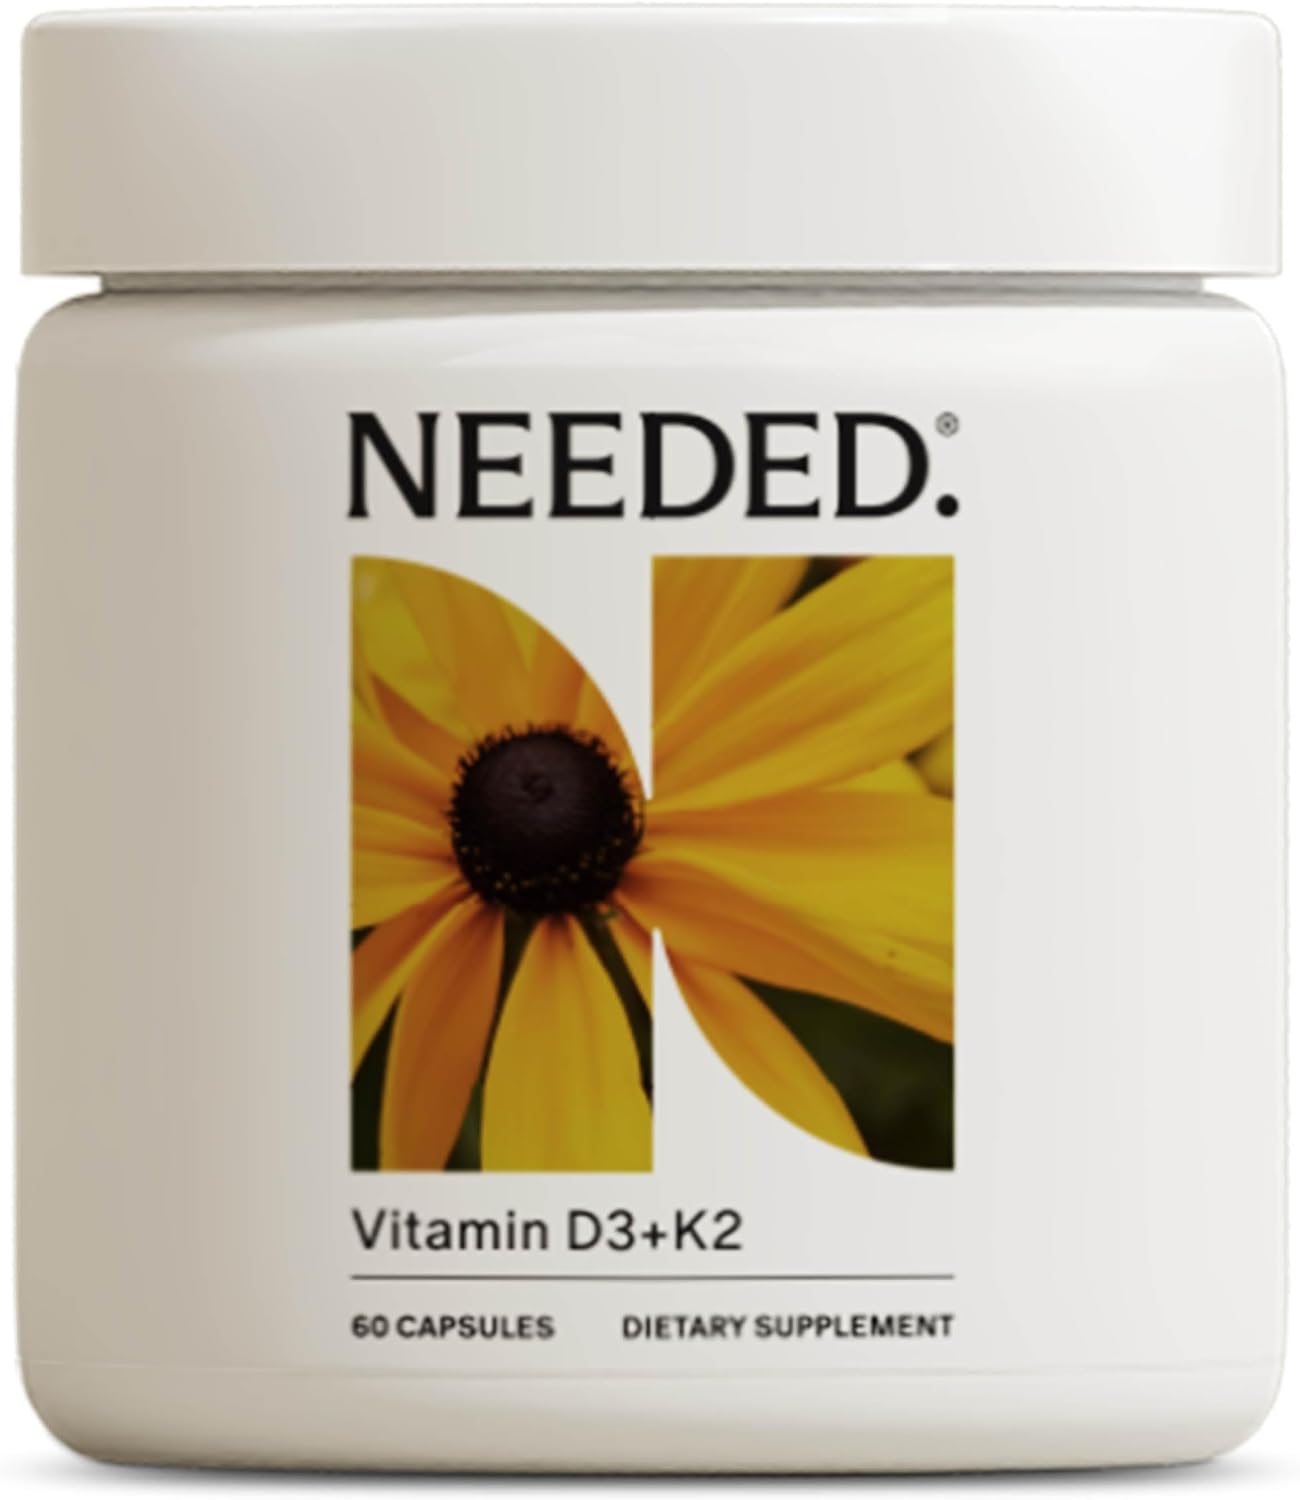 Needed. Expertly-Formulated Prenatal Vitamin D3/K2 | for Fertility, Pregnancy Breastfeeding, and Postpartum, Healthy Immunity and Bone Development, Supports Breast Milk Vitamin D Levels | 60 Capsules